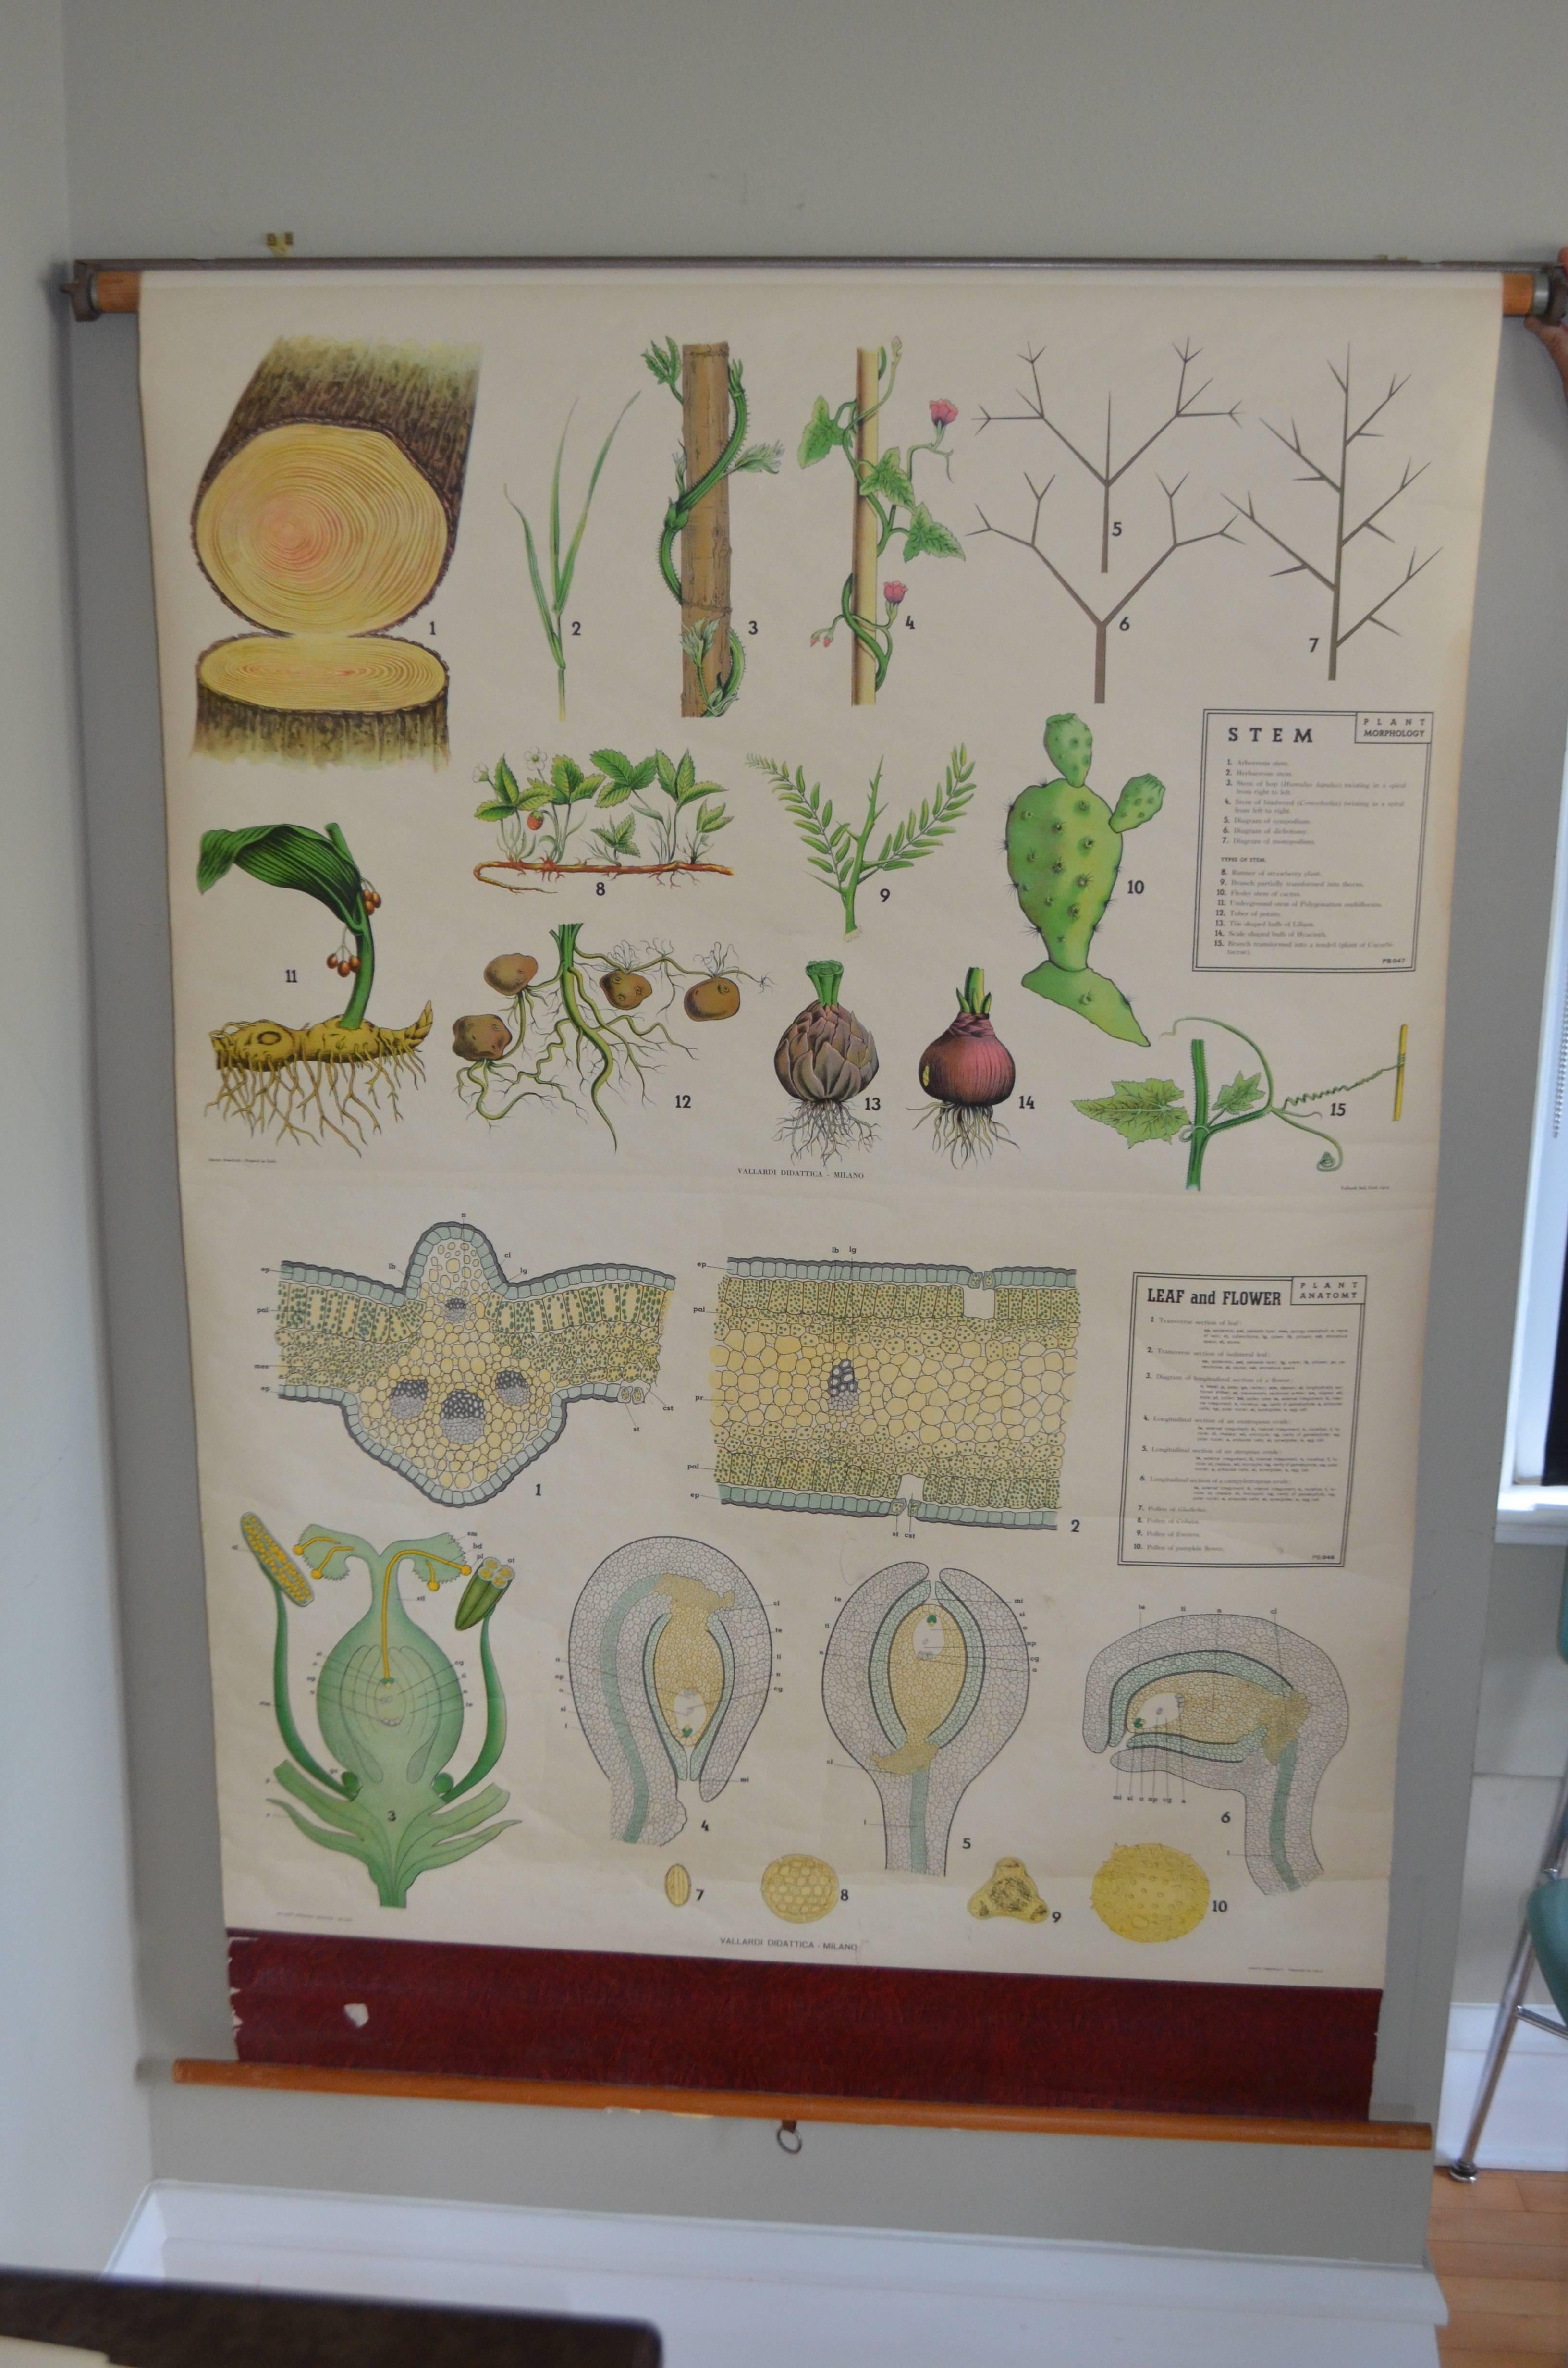 Schoolhouse Map from the Biology Classroom 'The Stem, Leaf and Flower' For Sale